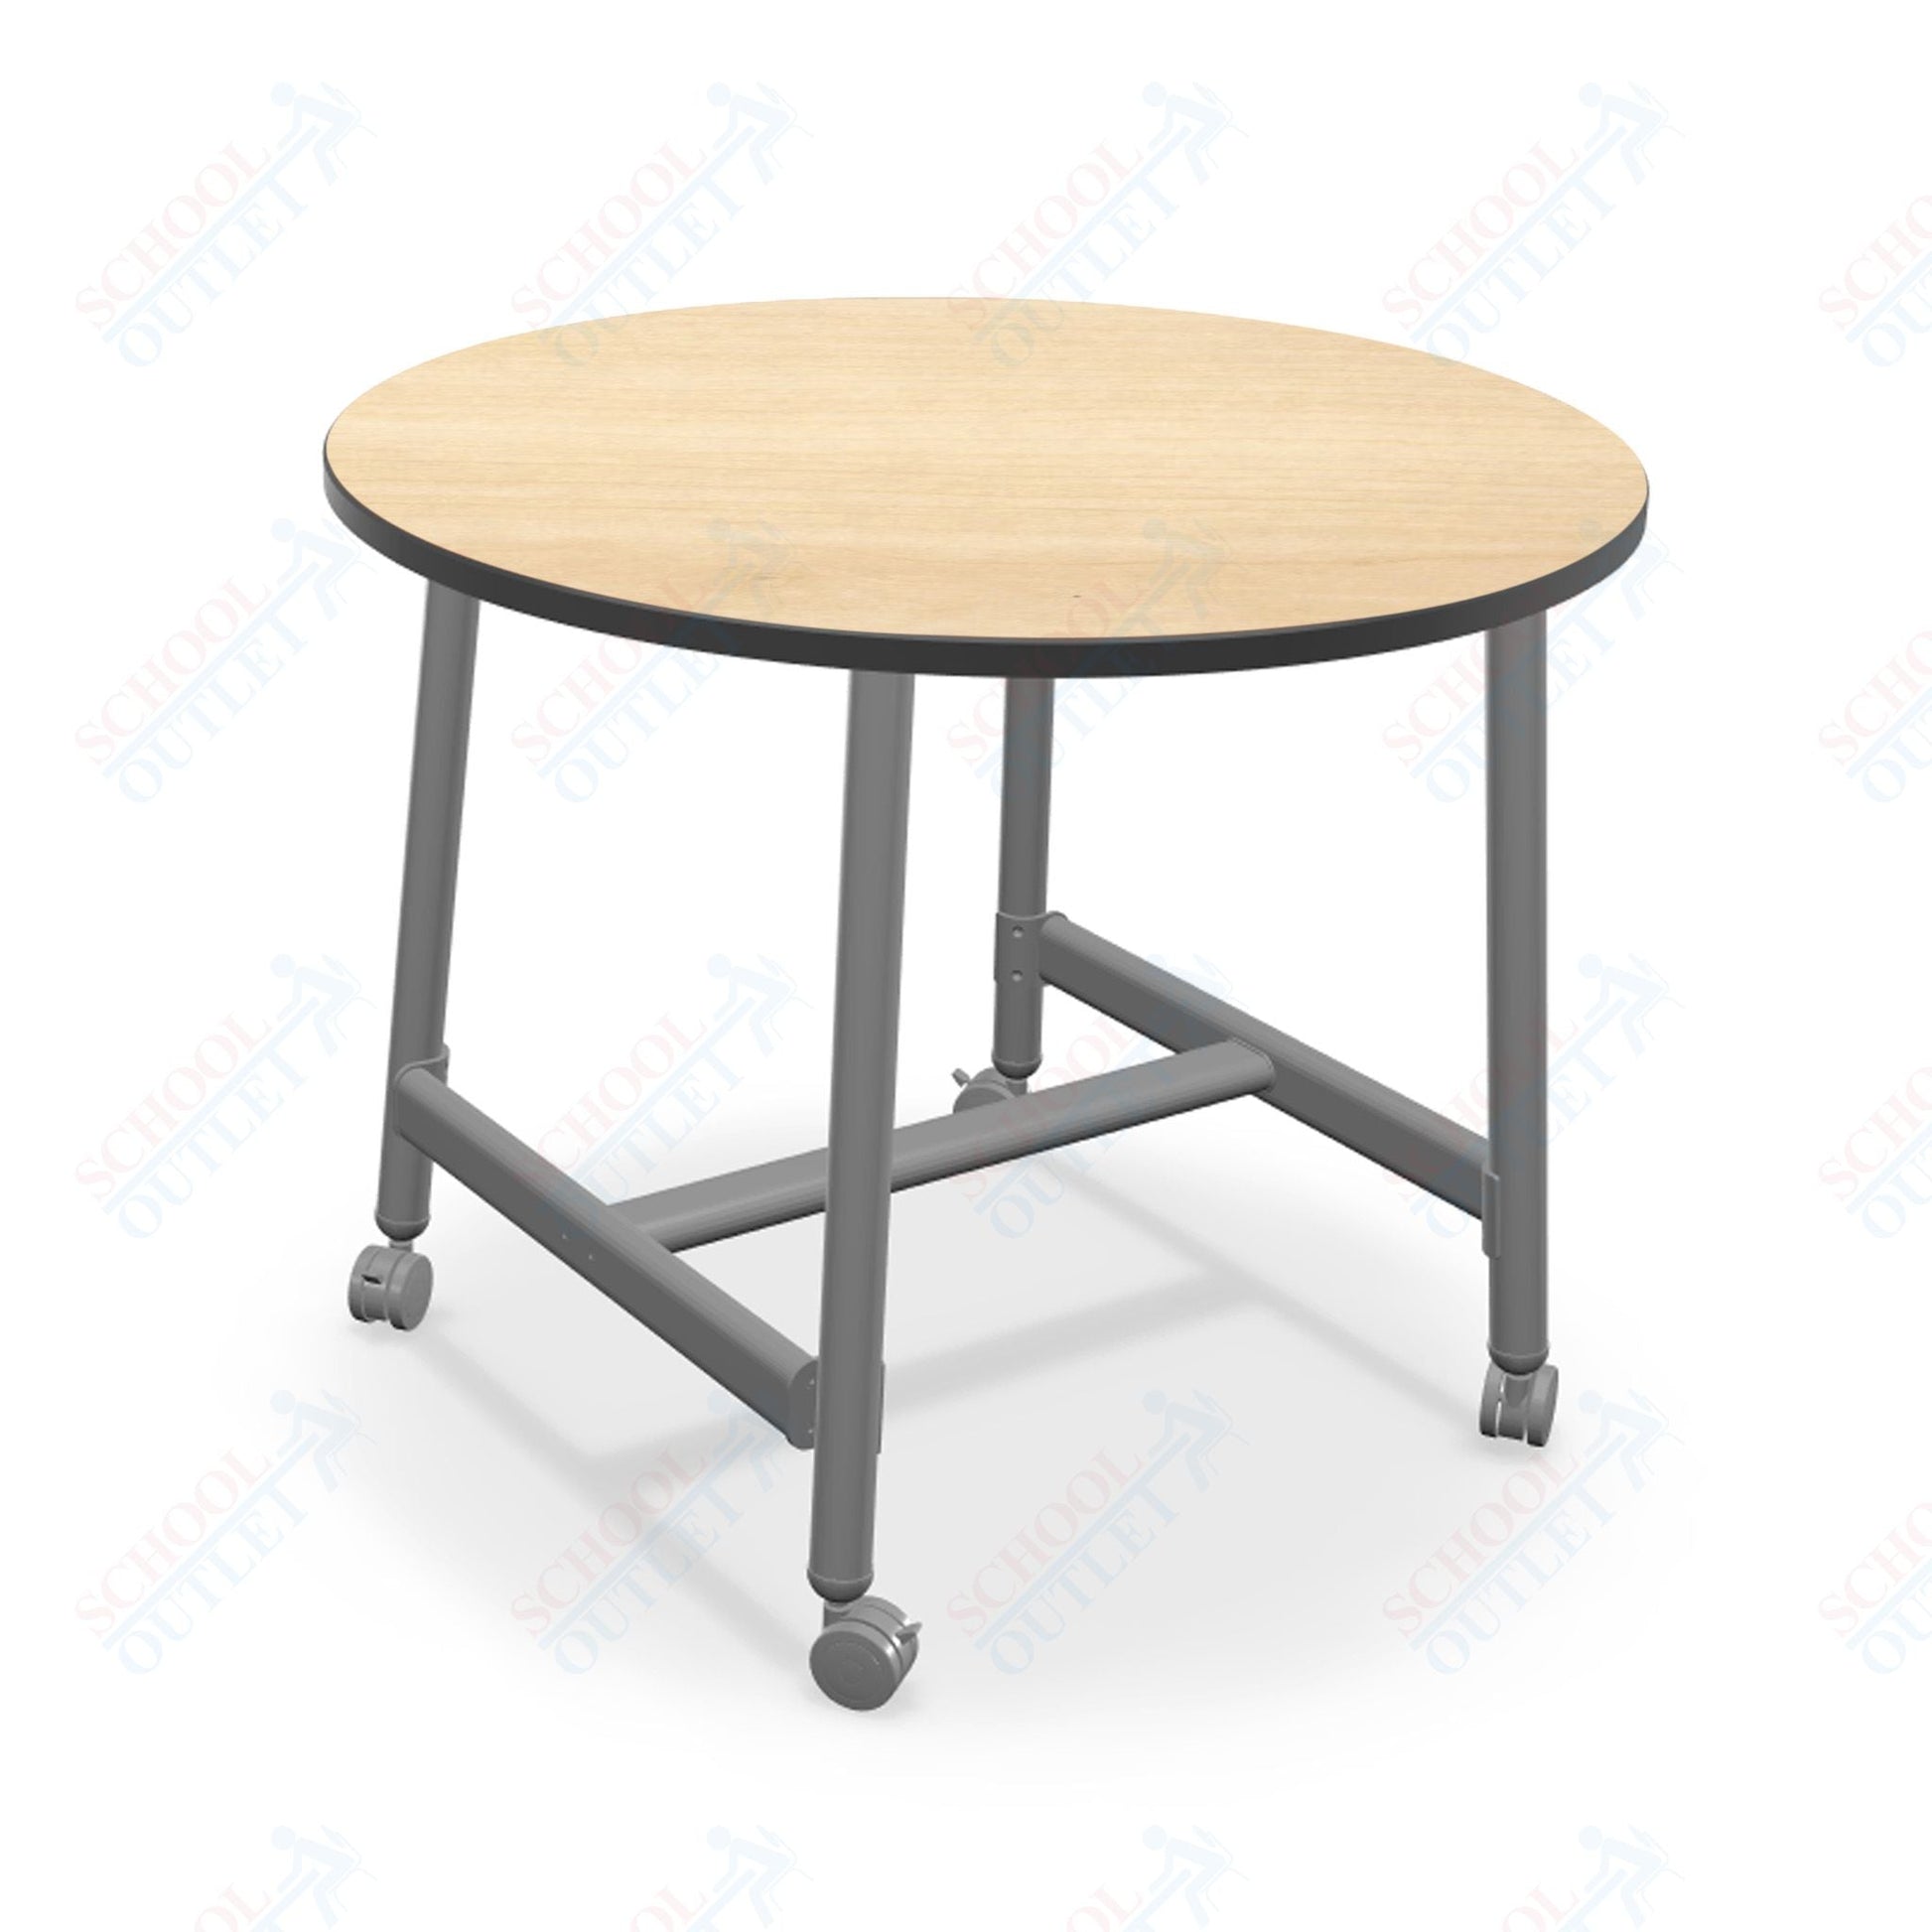 Mooreco Akt Table – 36" Round, Laminate Top, Fixed Height Available in 29"H, 36"H, or 42"H - SchoolOutlet